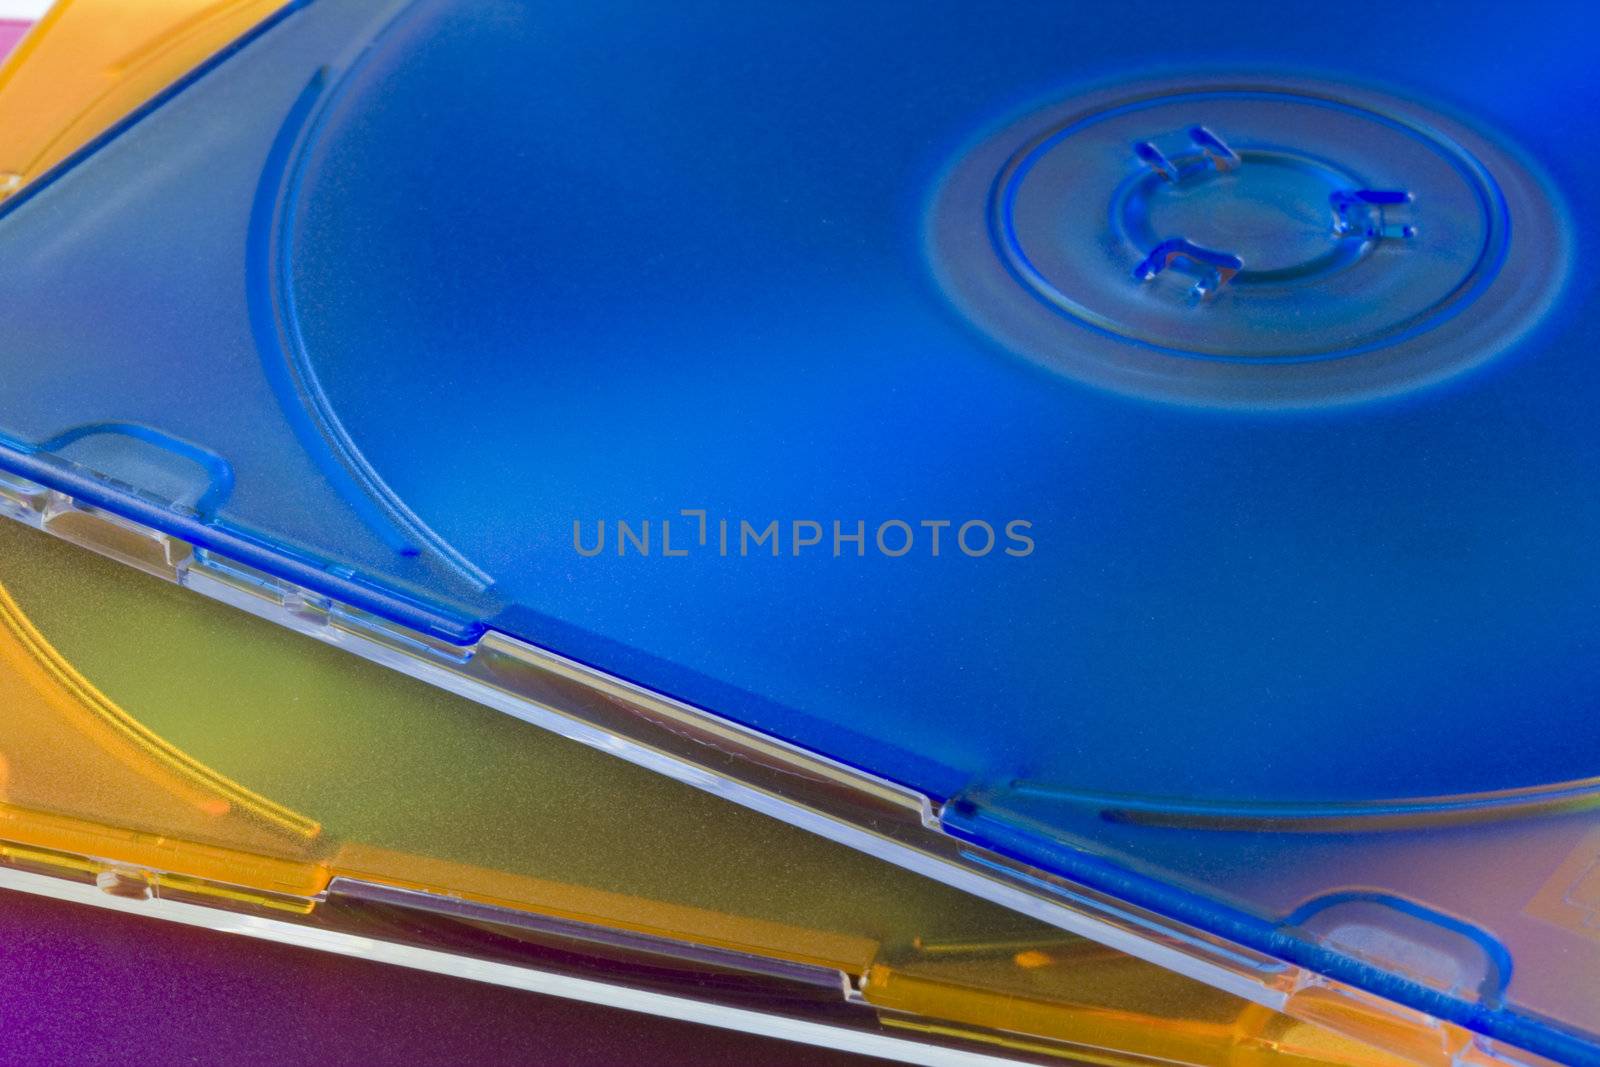 CD or DVD disks in colorful jewel cases by PixelsAway